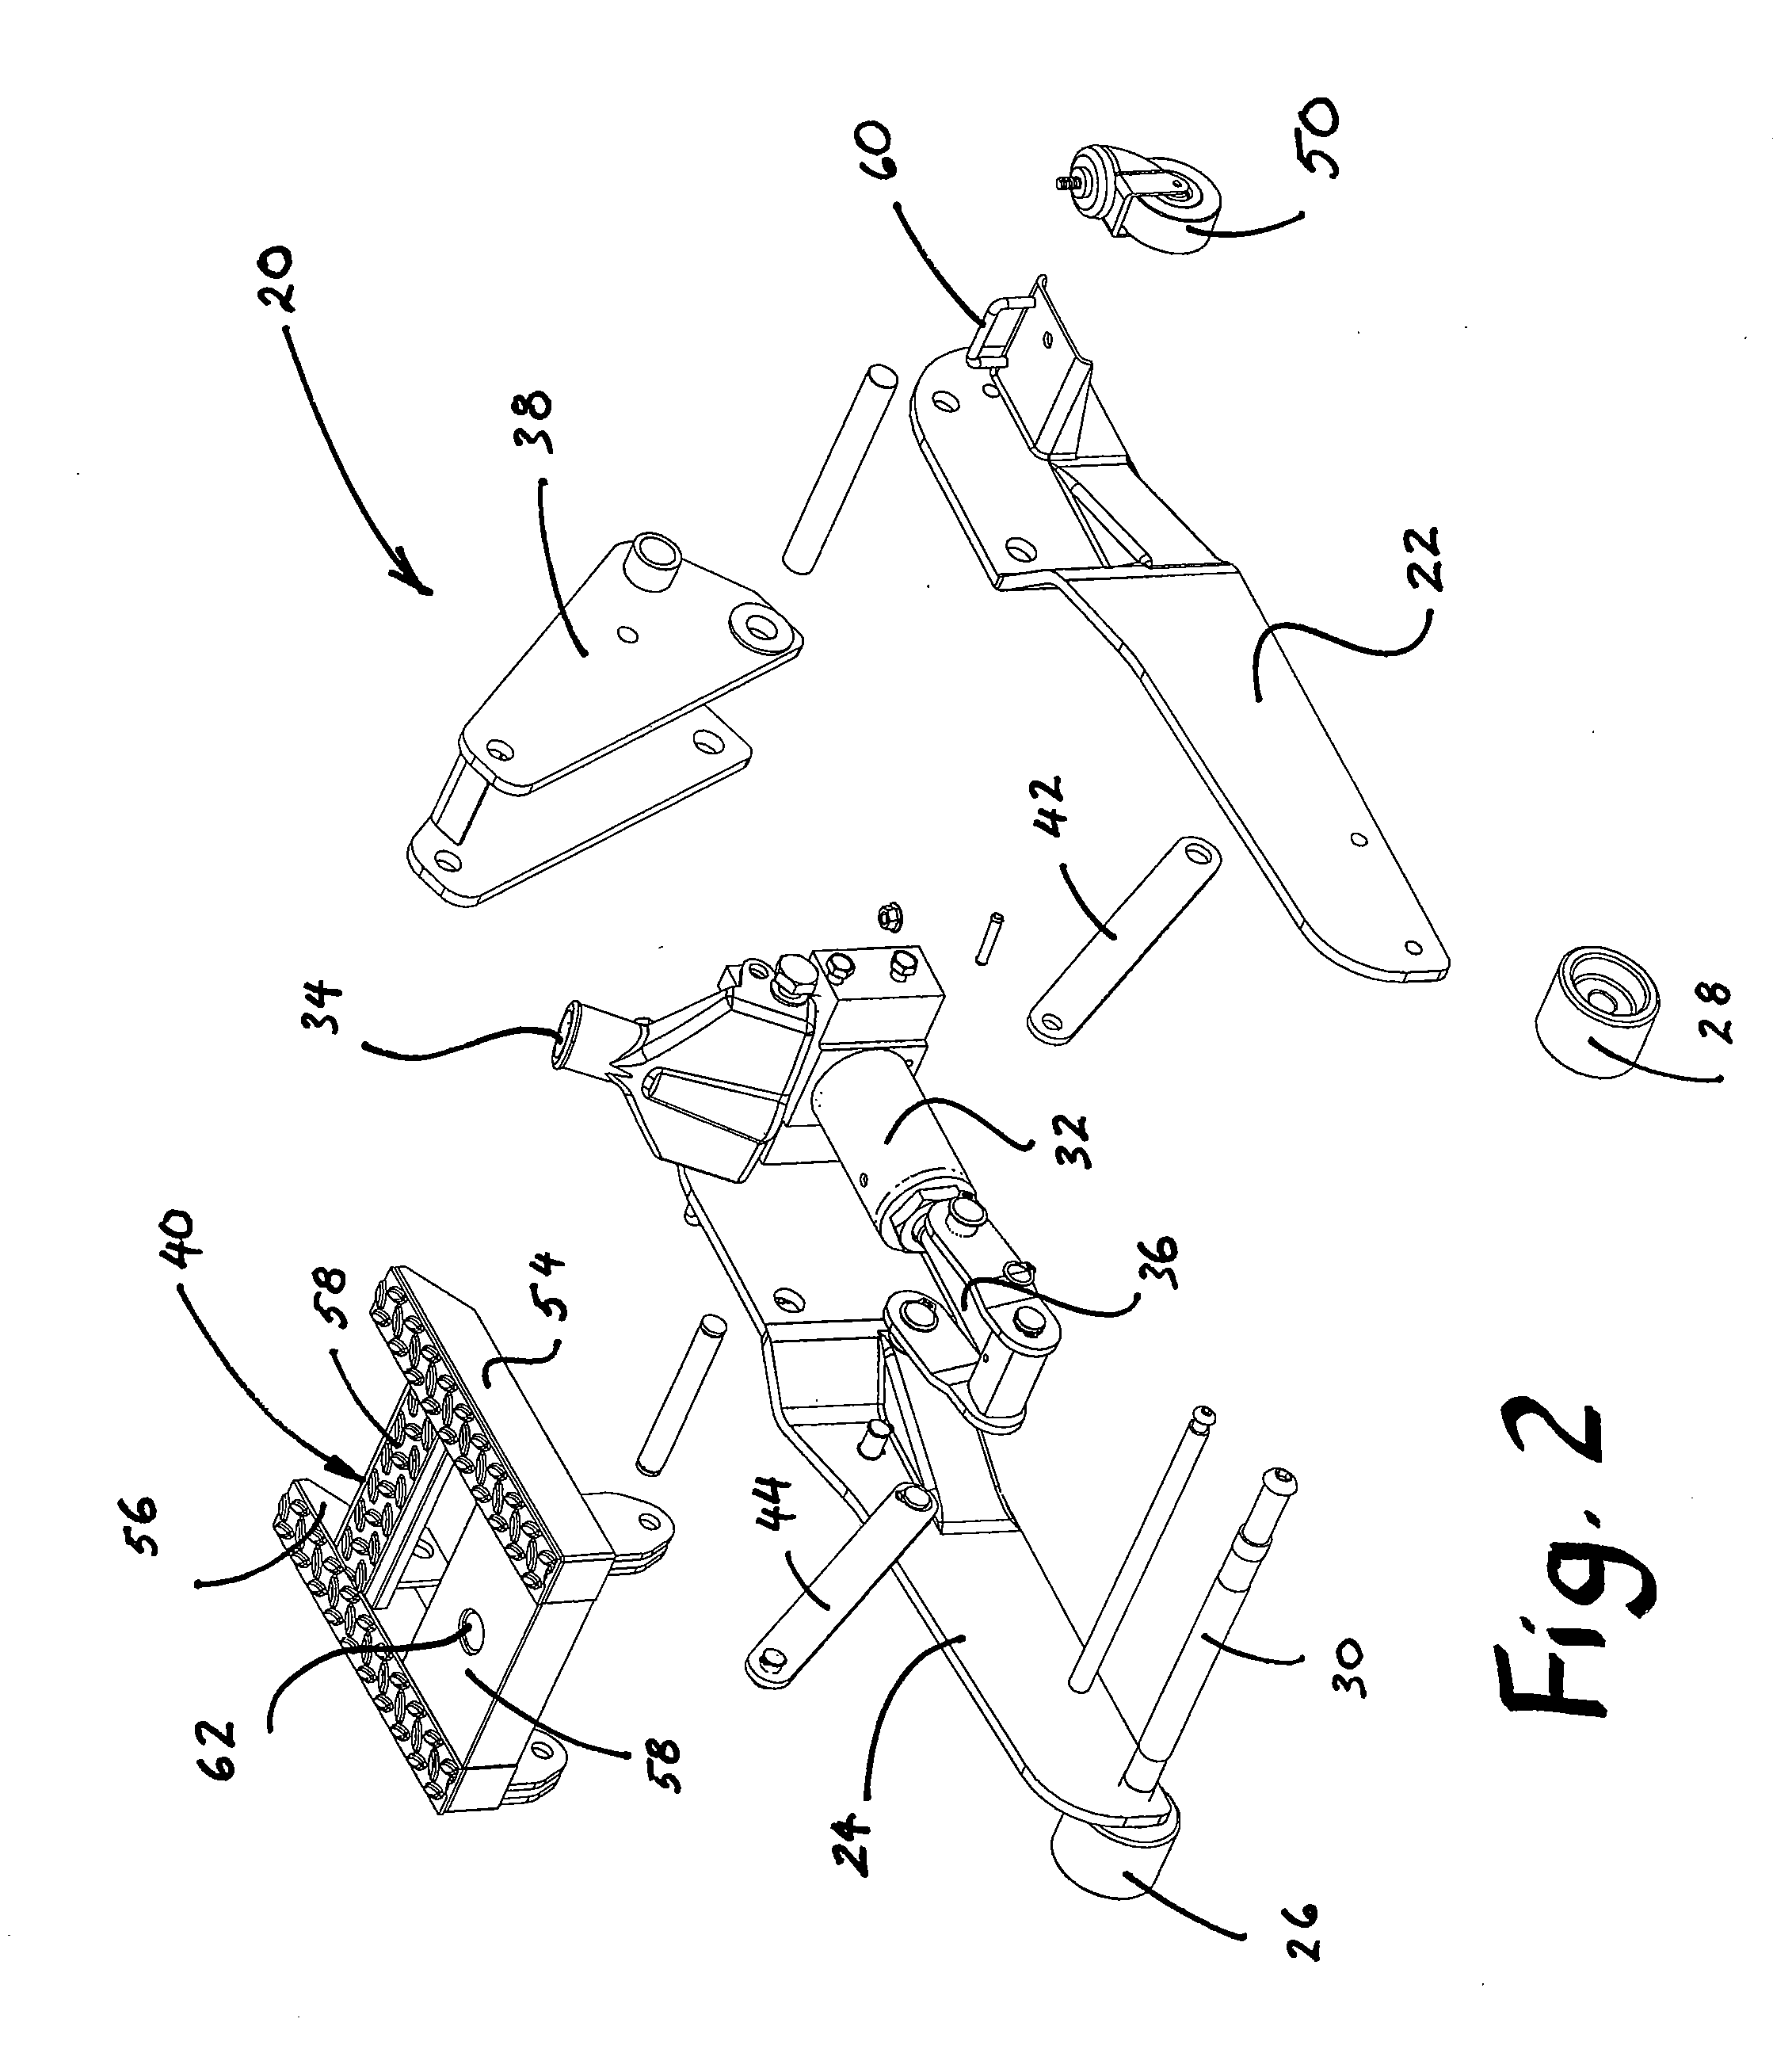 Jack with selectively interchangeable components